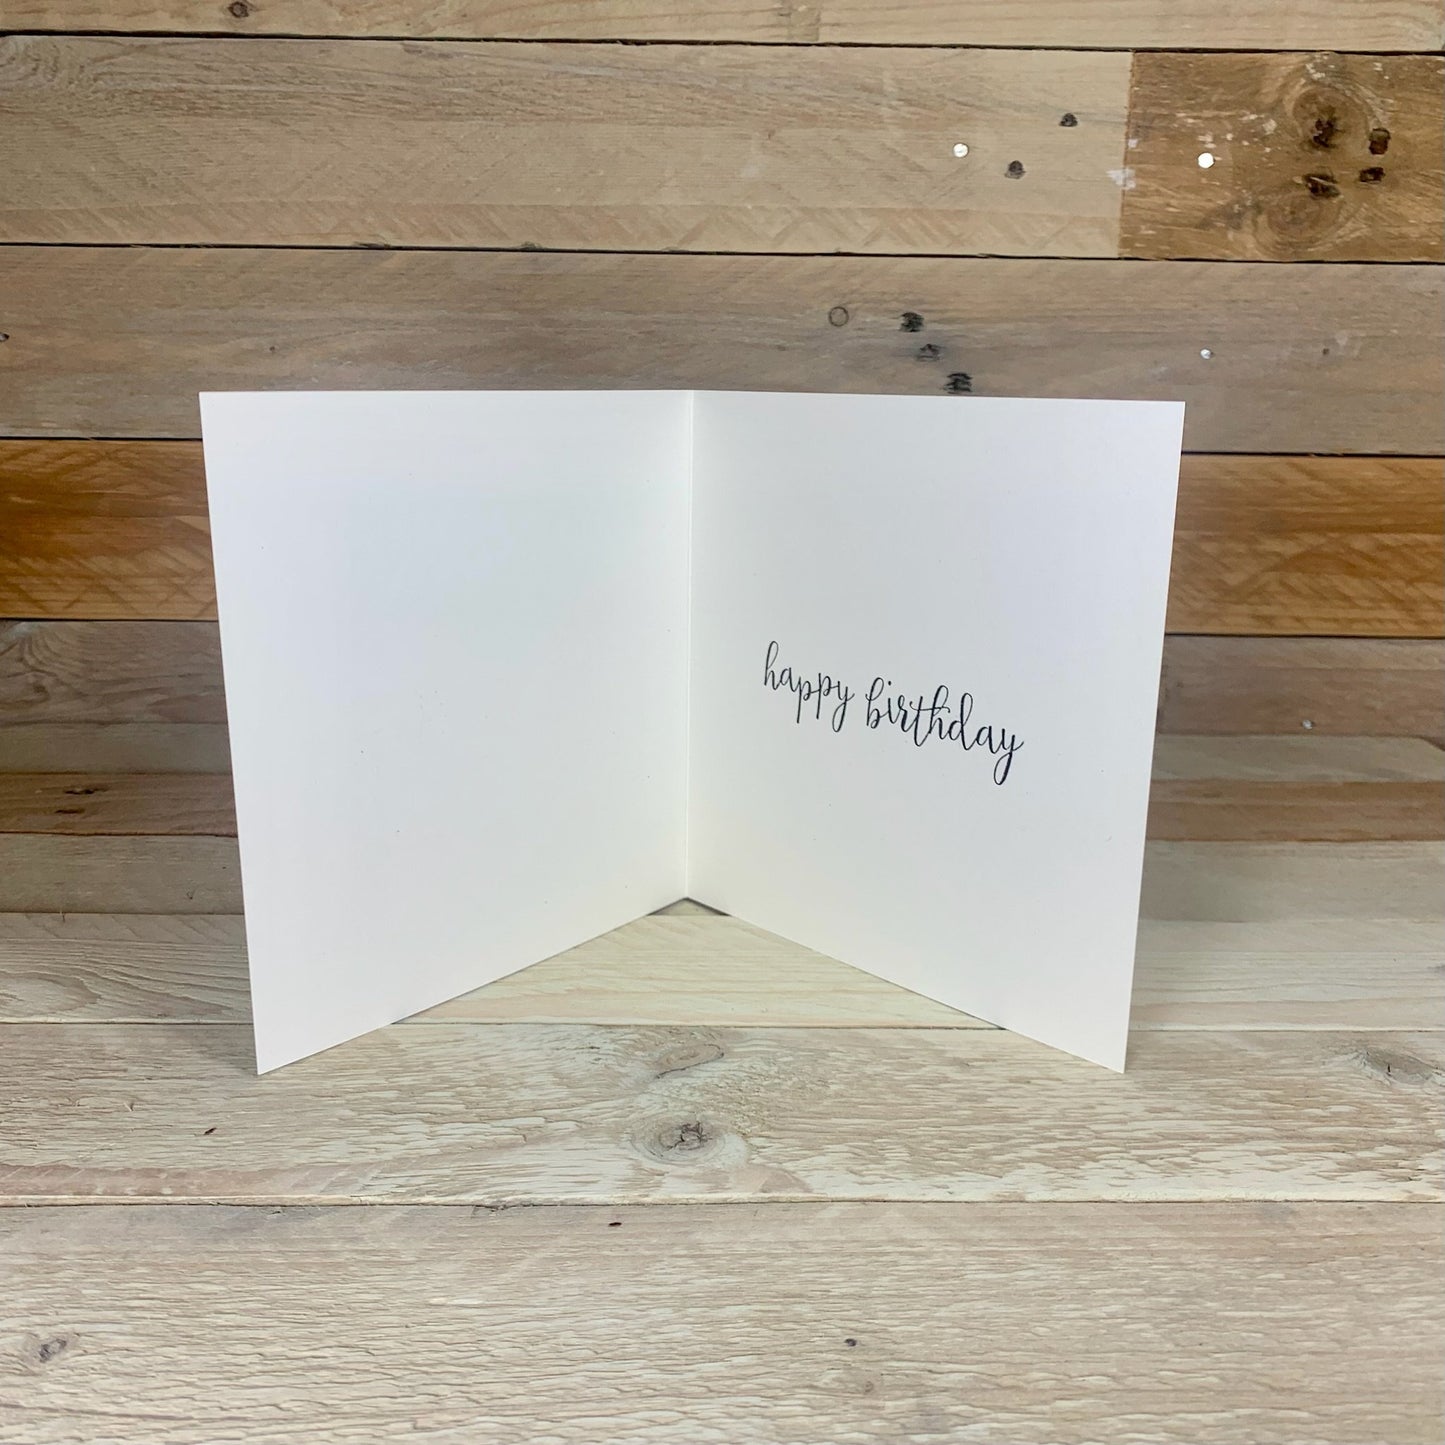 Gary the Goat Birthday Card - Arty Bee Designs 